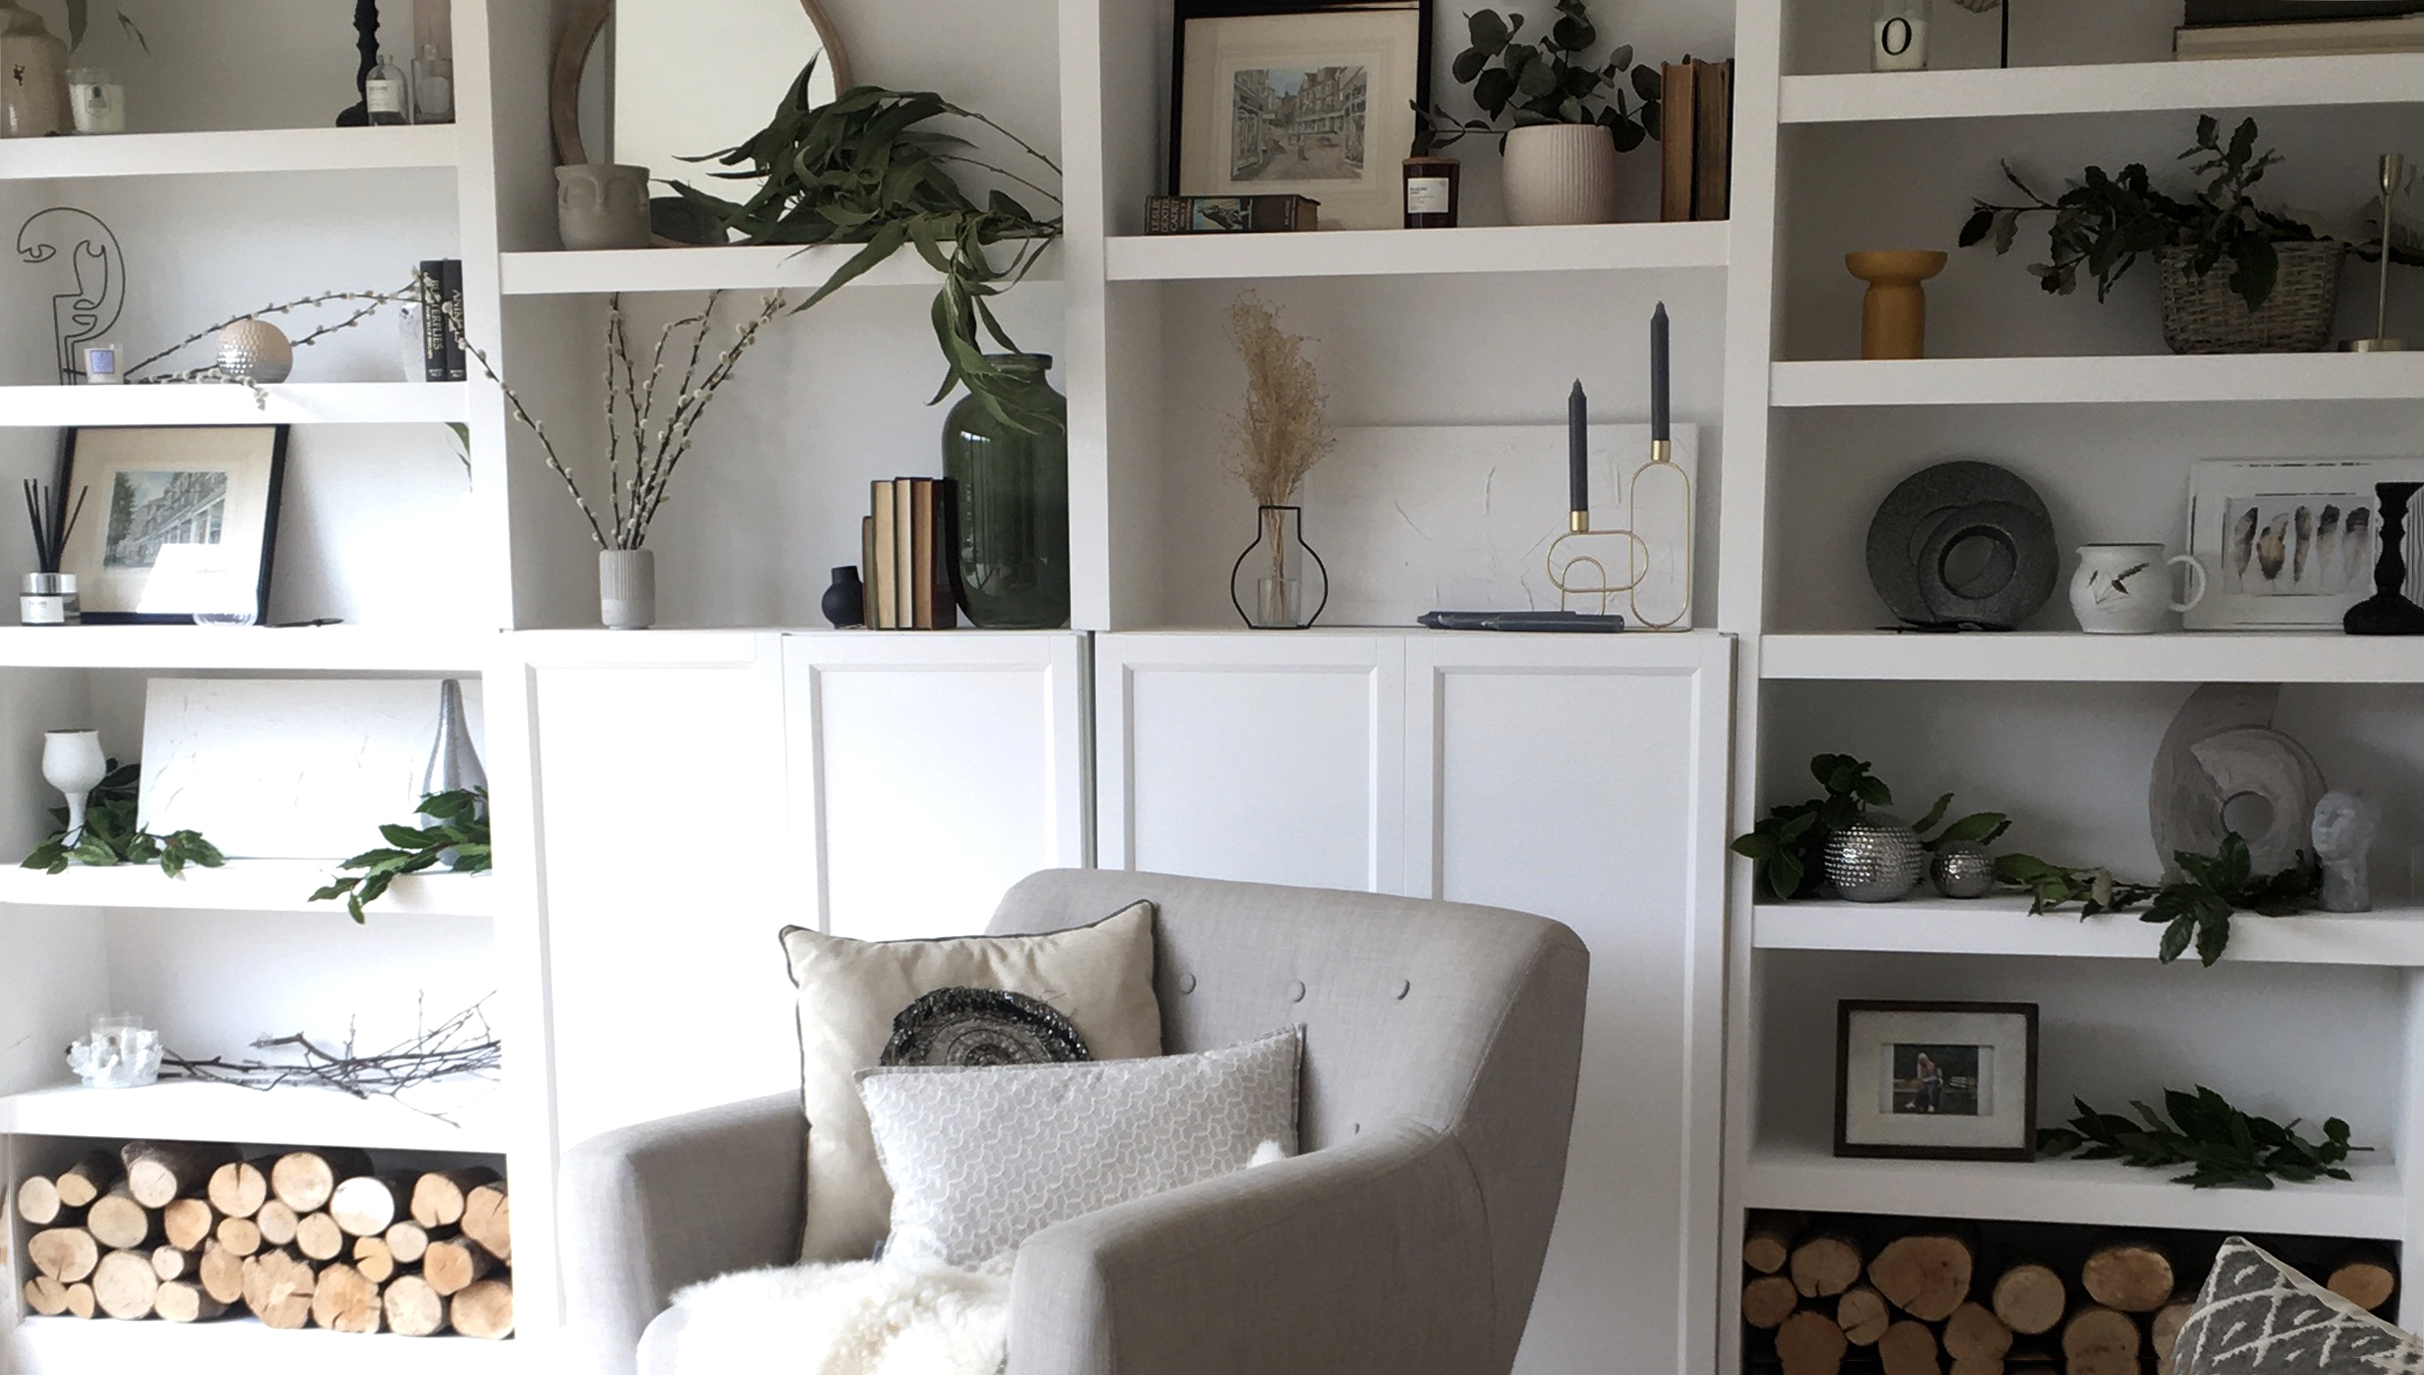 peach Pronoun Dwell This IKEA BILLY bookcase is now a bespoke built-in library | Real Homes